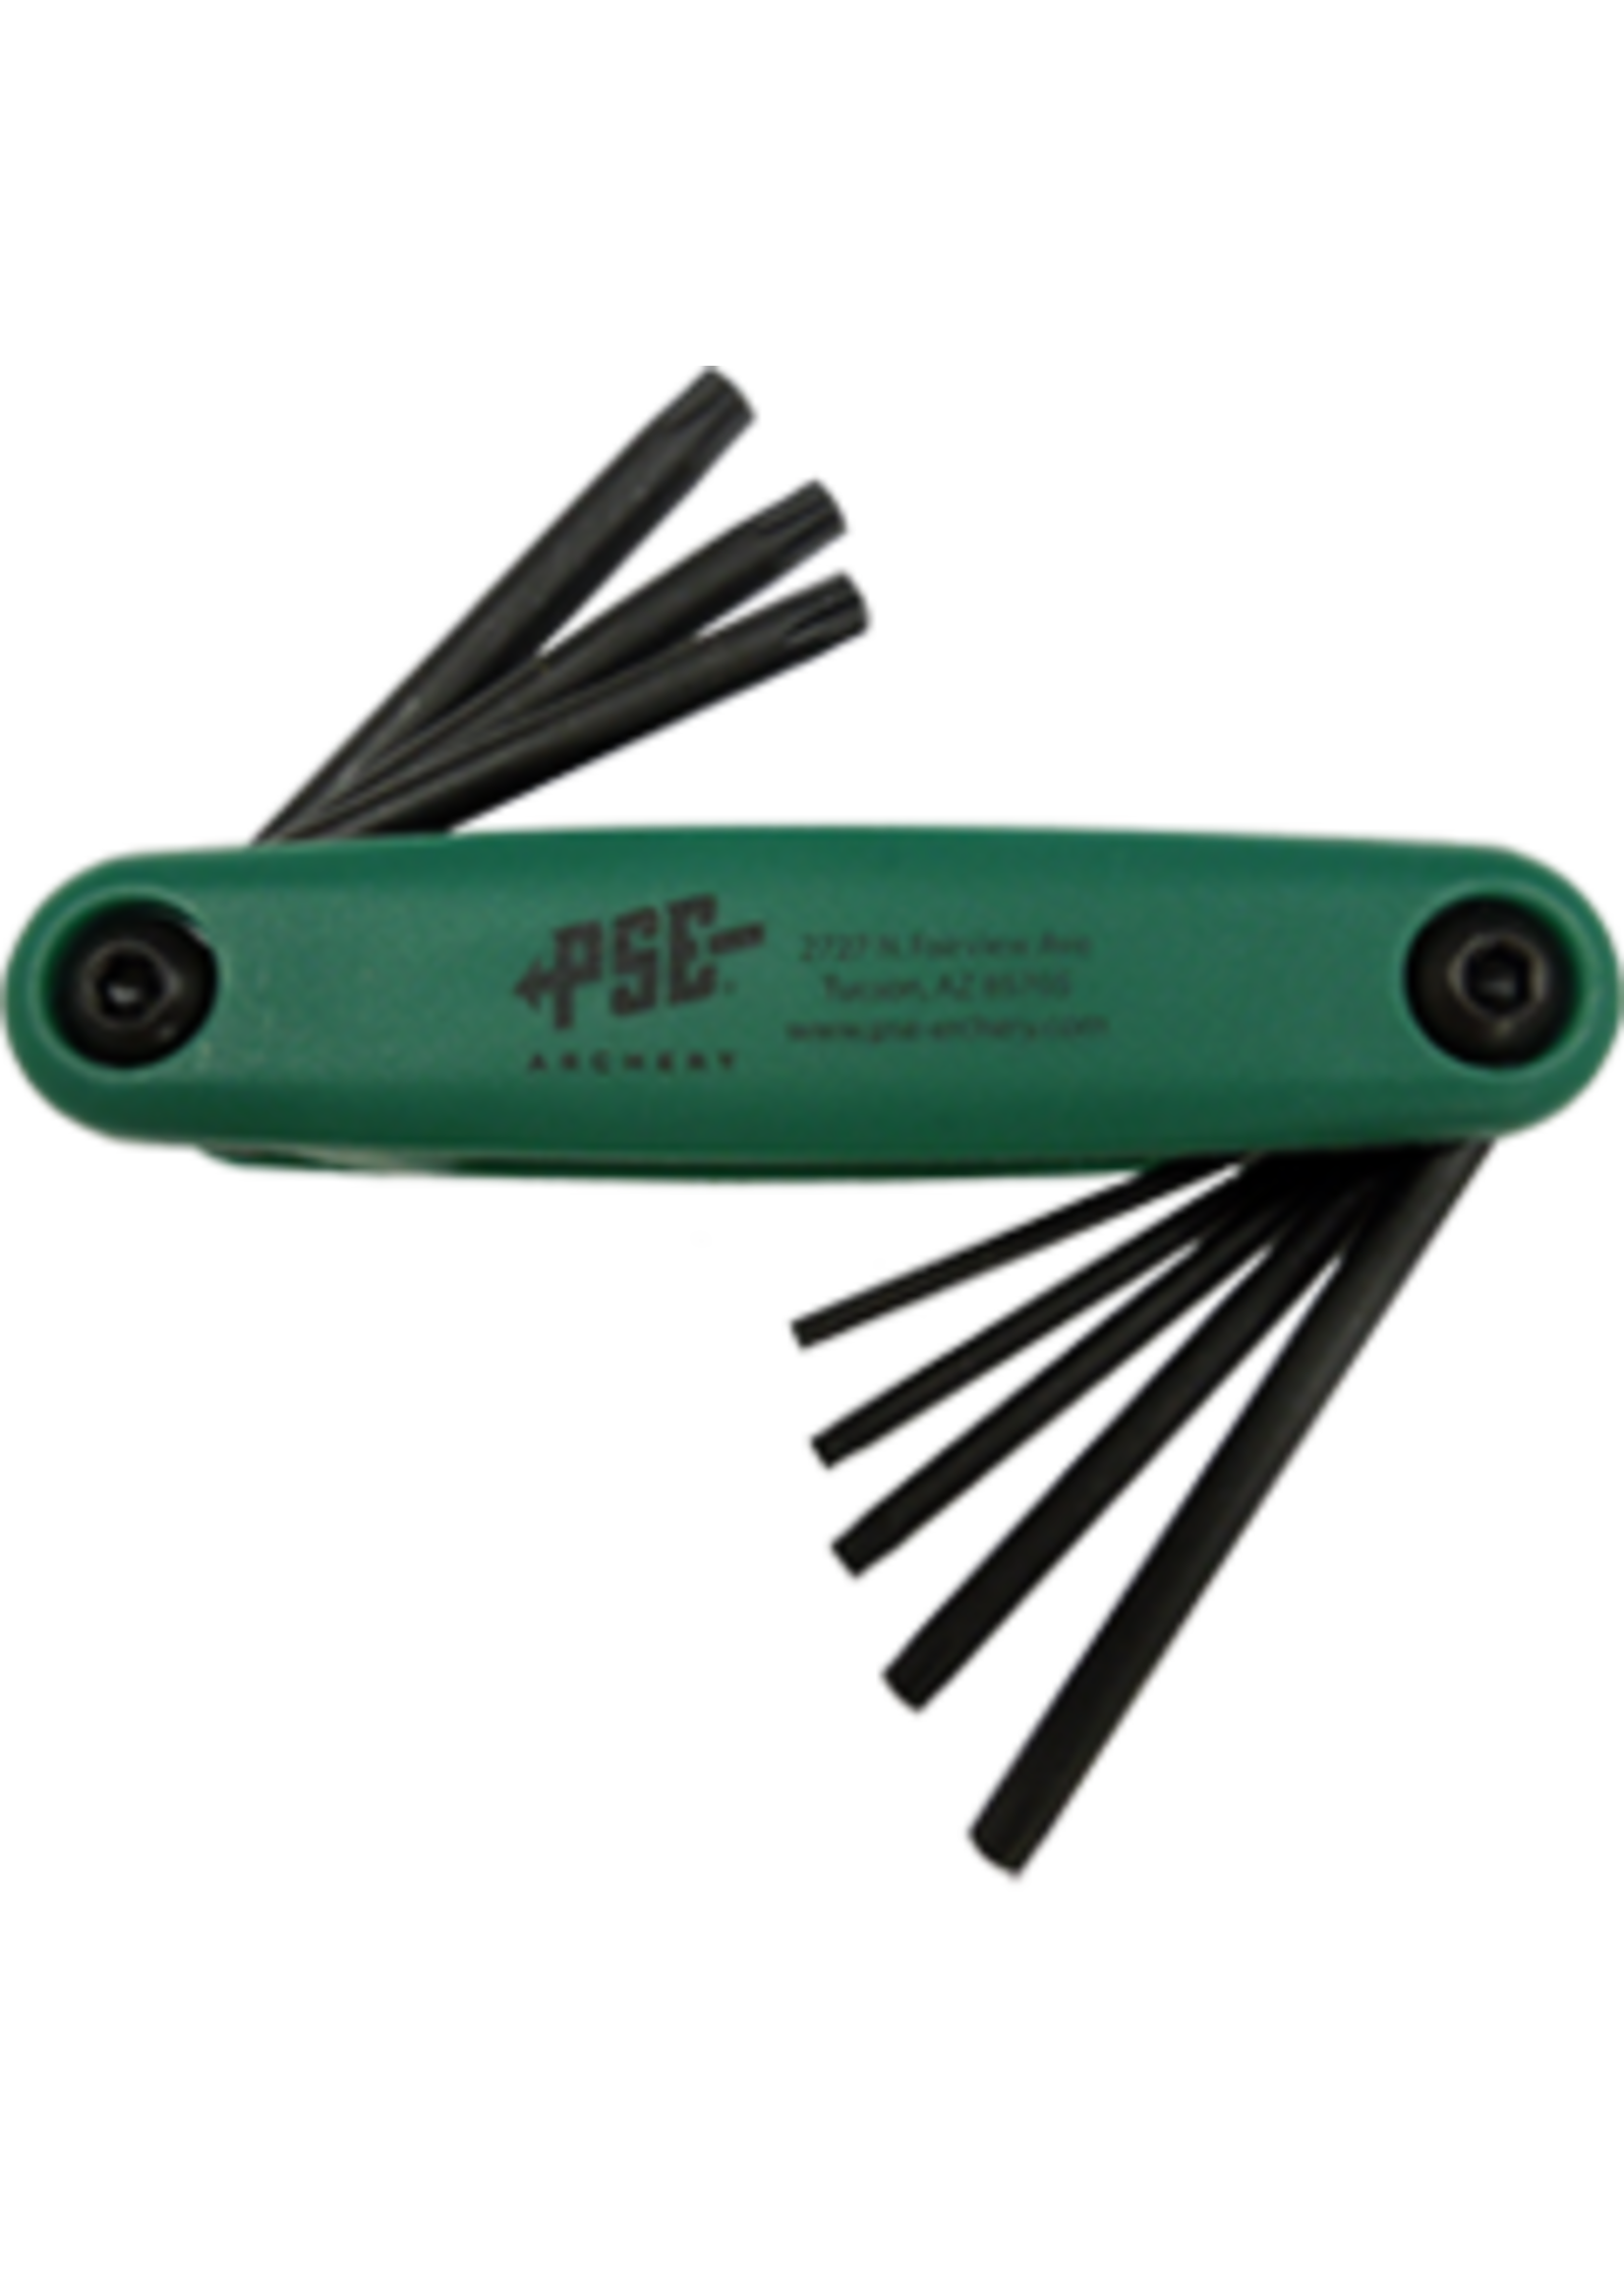 PSE star wrench set